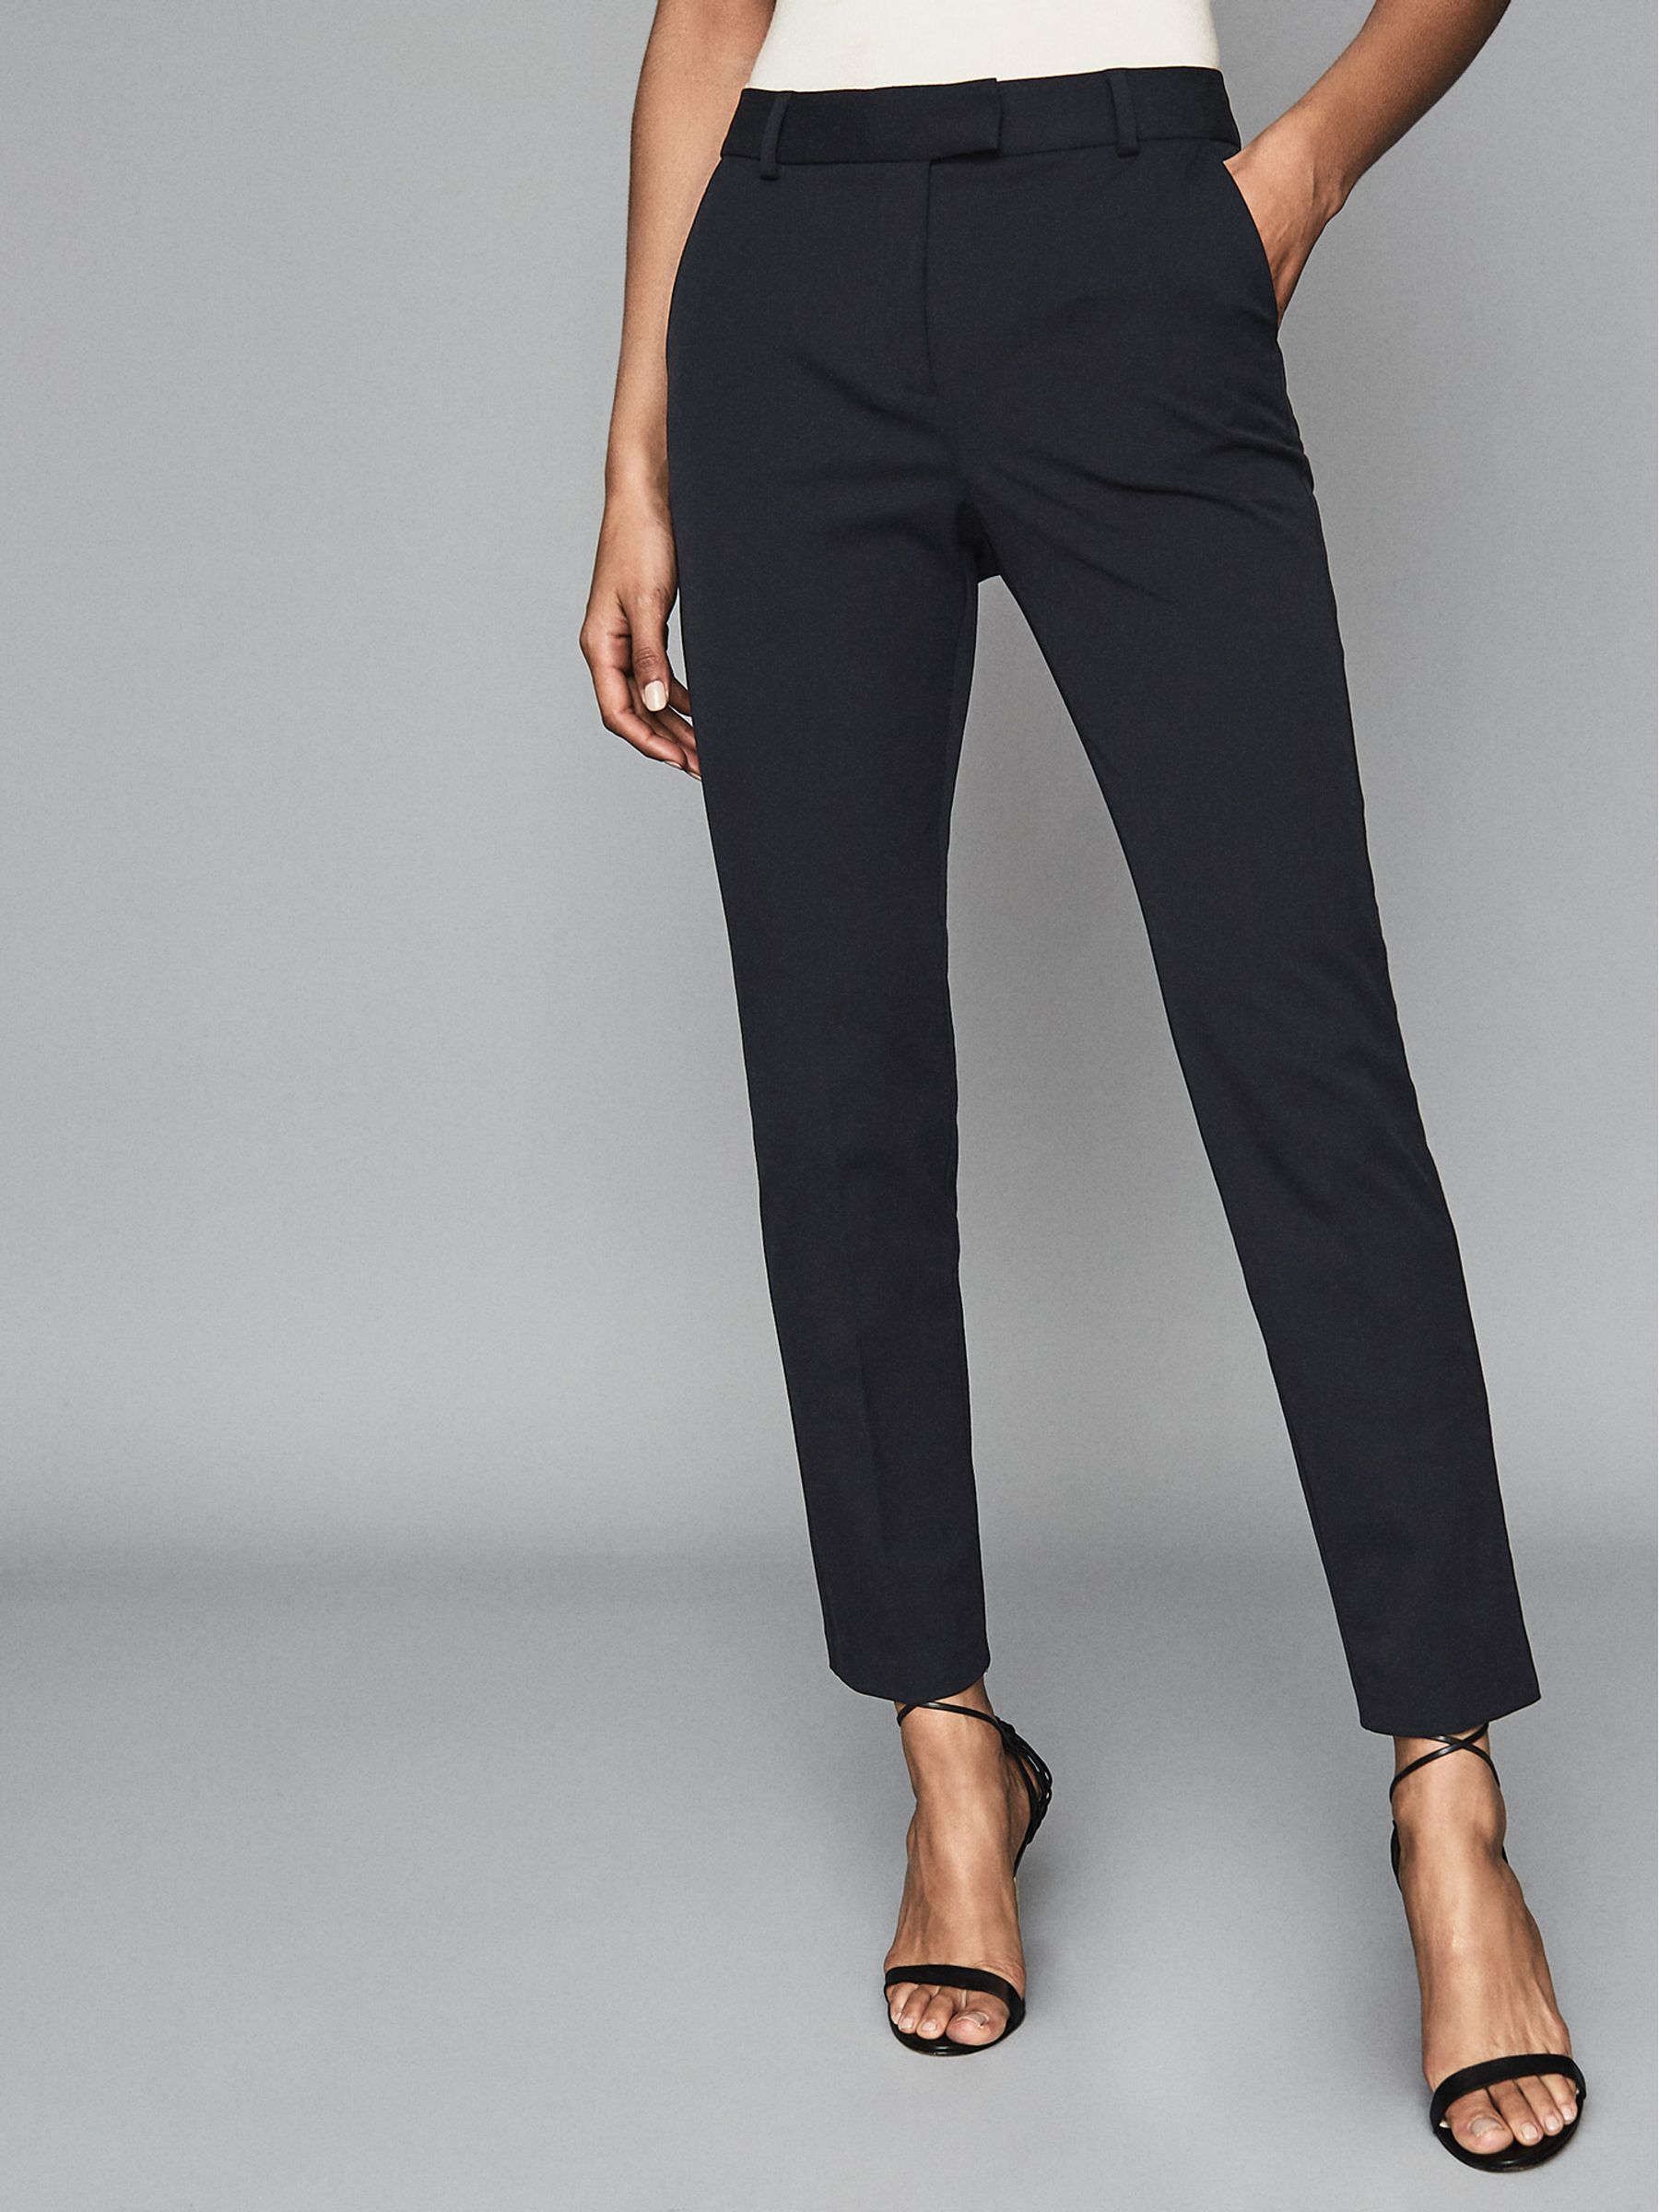 Reiss Joanne Cropped Tailored Trousers - REISS